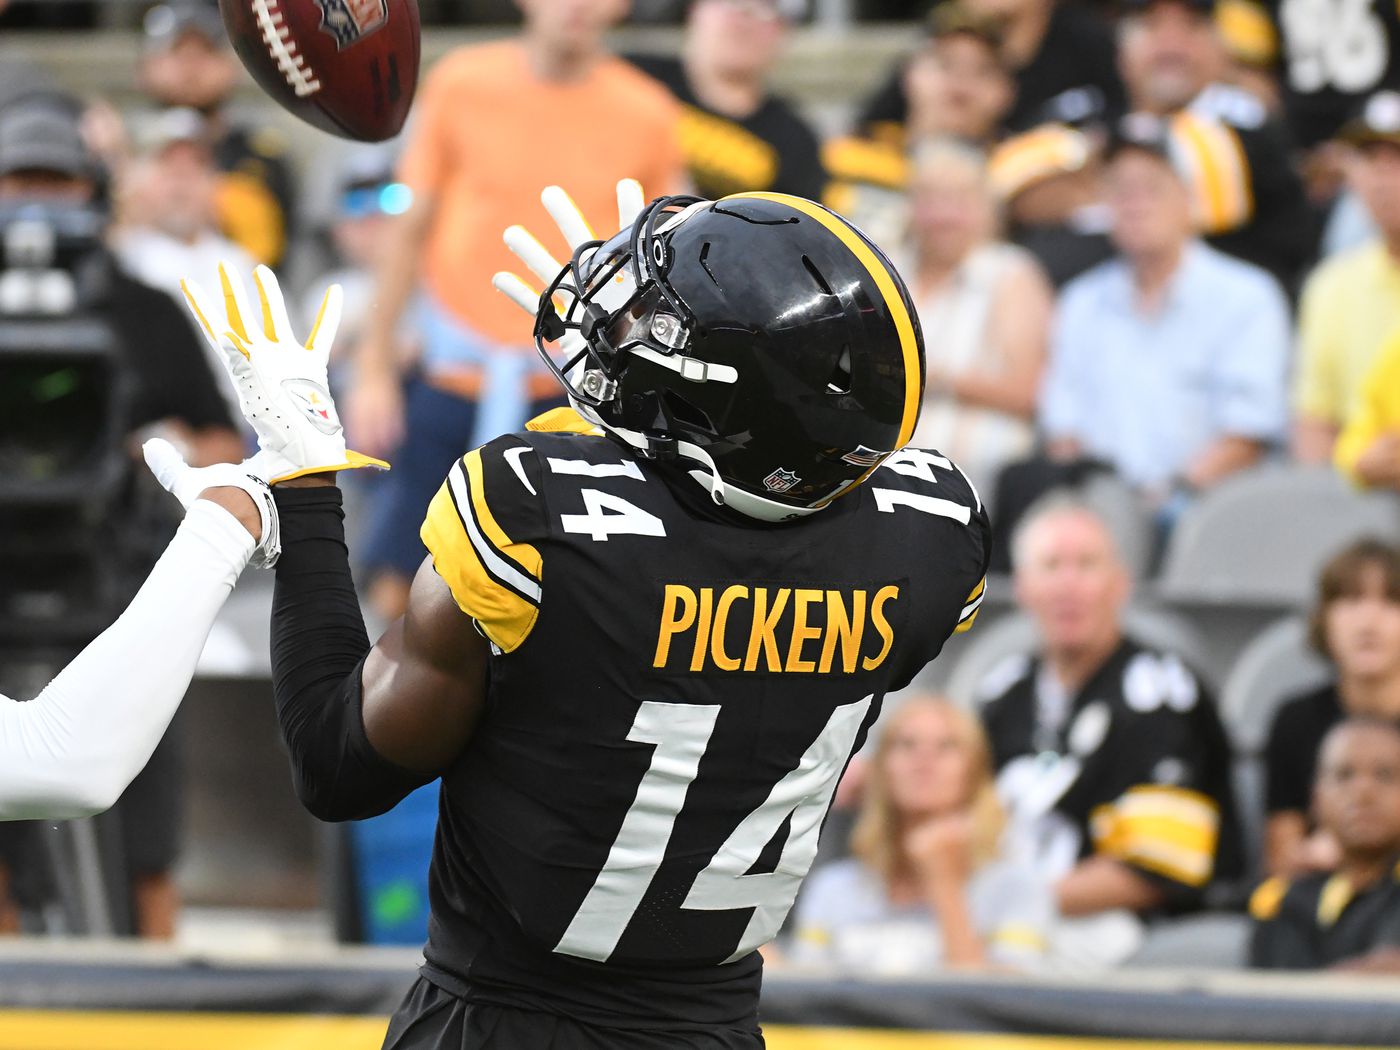 George Pickens didn't need a superb performance to give him confidence the Steel Curtain